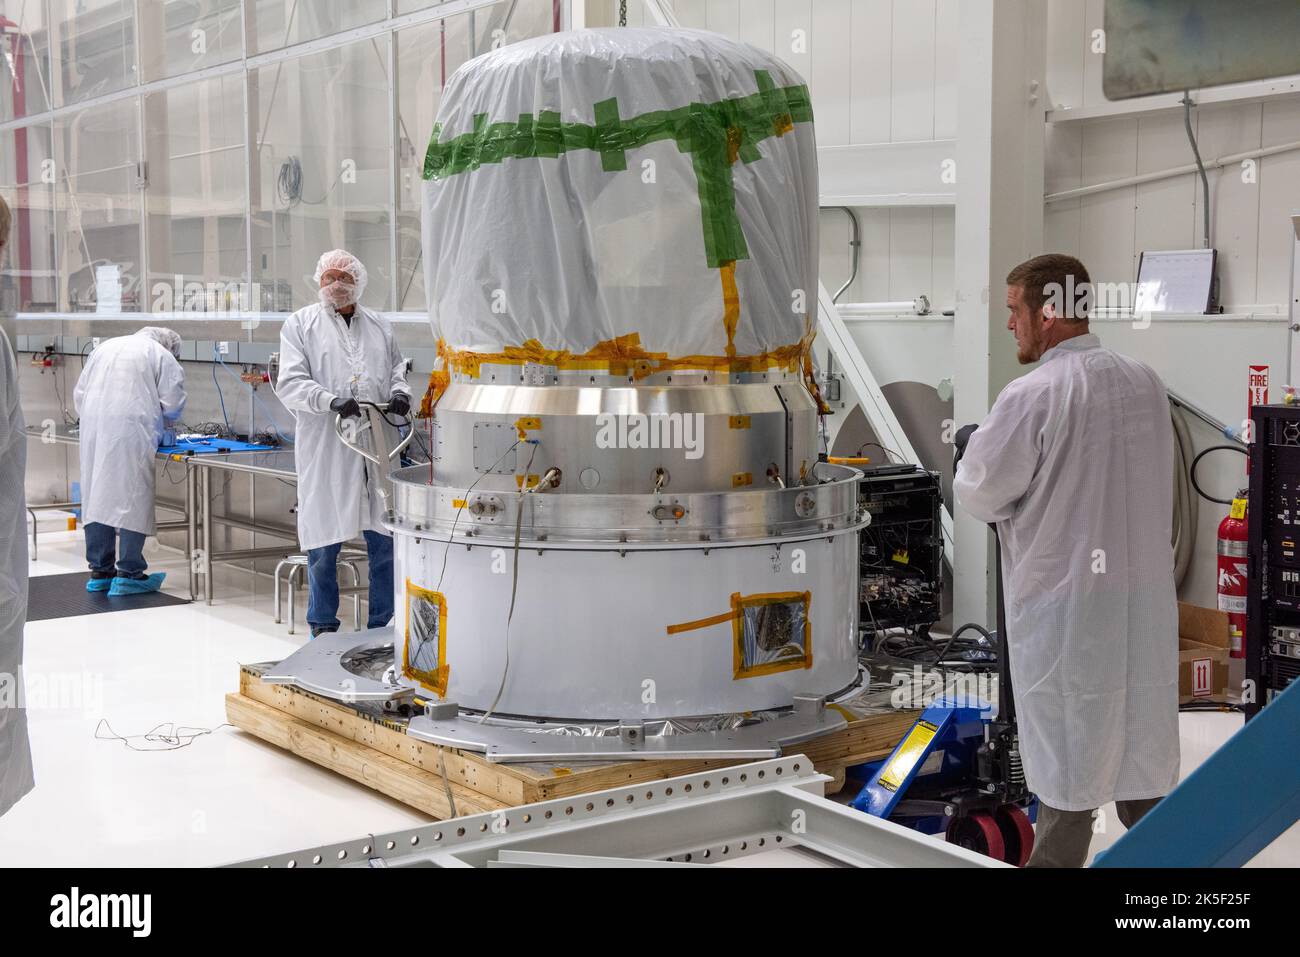 Technicians prepare to move NASA’s Low-Earth Orbit Flight Test of an Inflatable Decelerator (LOFTID) re-entry vehicle onto a turnover fixture for prelaunch processing inside Building 836 at Vandenberg Space Force Base in California on Aug. 19, 2022. Dedicated to the memory of Bernard Kutter, LOFTID is a technology demonstration mission aimed at validating inflatable heat shield technology for atmospheric re-entry. This technology could enable missions to other planetary bodies, as well as allow NASA to return heavier payloads from low-Earth orbit. LOFTID is a rideshare launching with the Natio Stock Photo